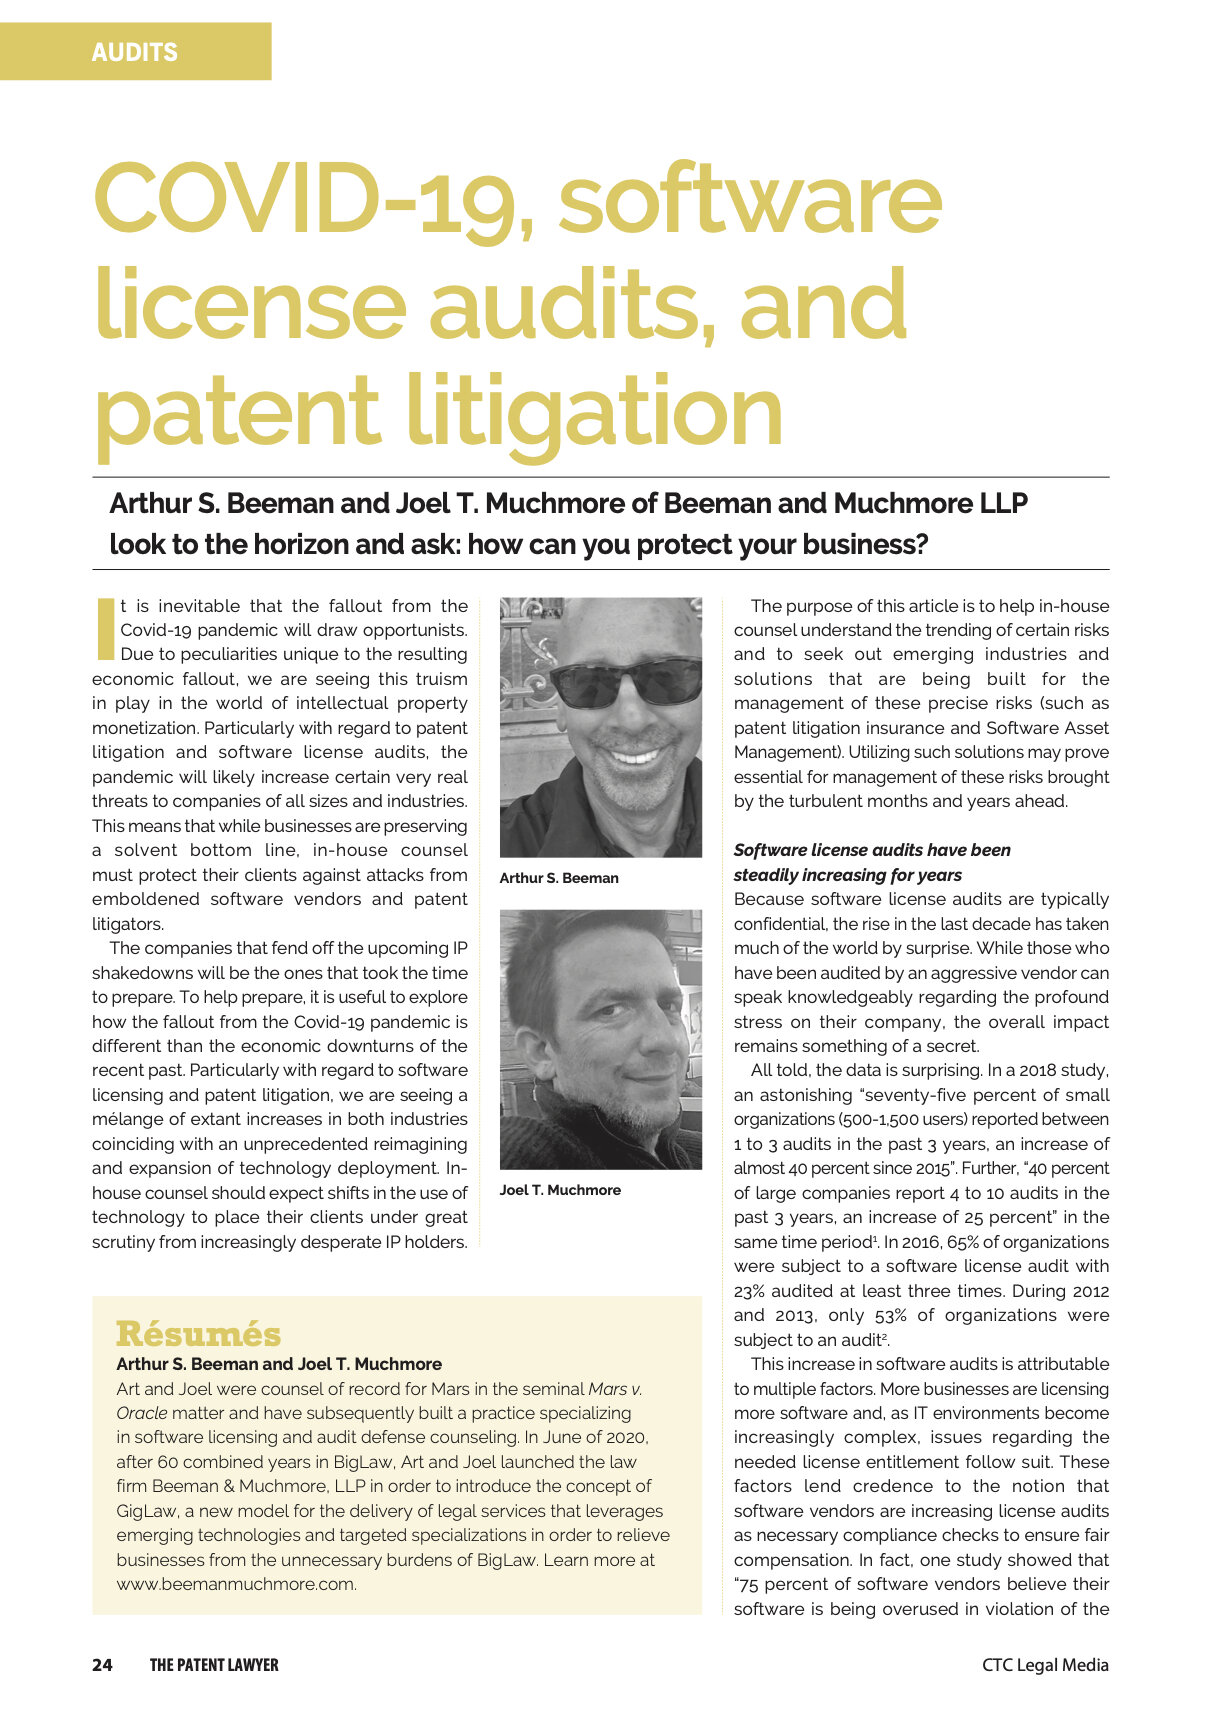 COVID-19, software license audits, and patent litigation